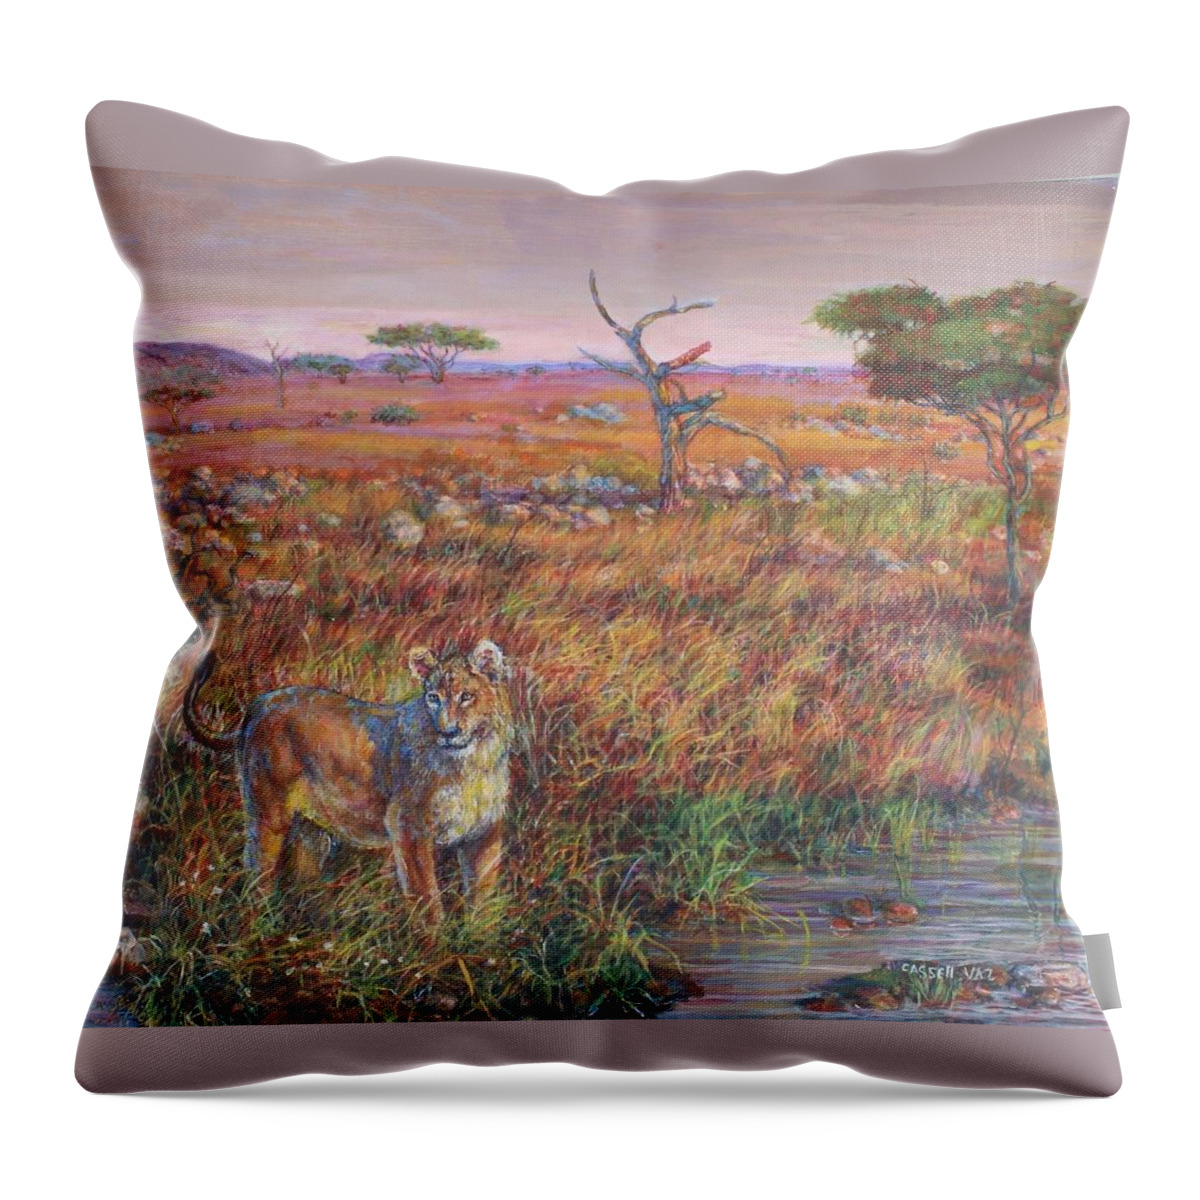 Africa Throw Pillow featuring the painting Serengeti Lioness by Veronica Cassell vaz